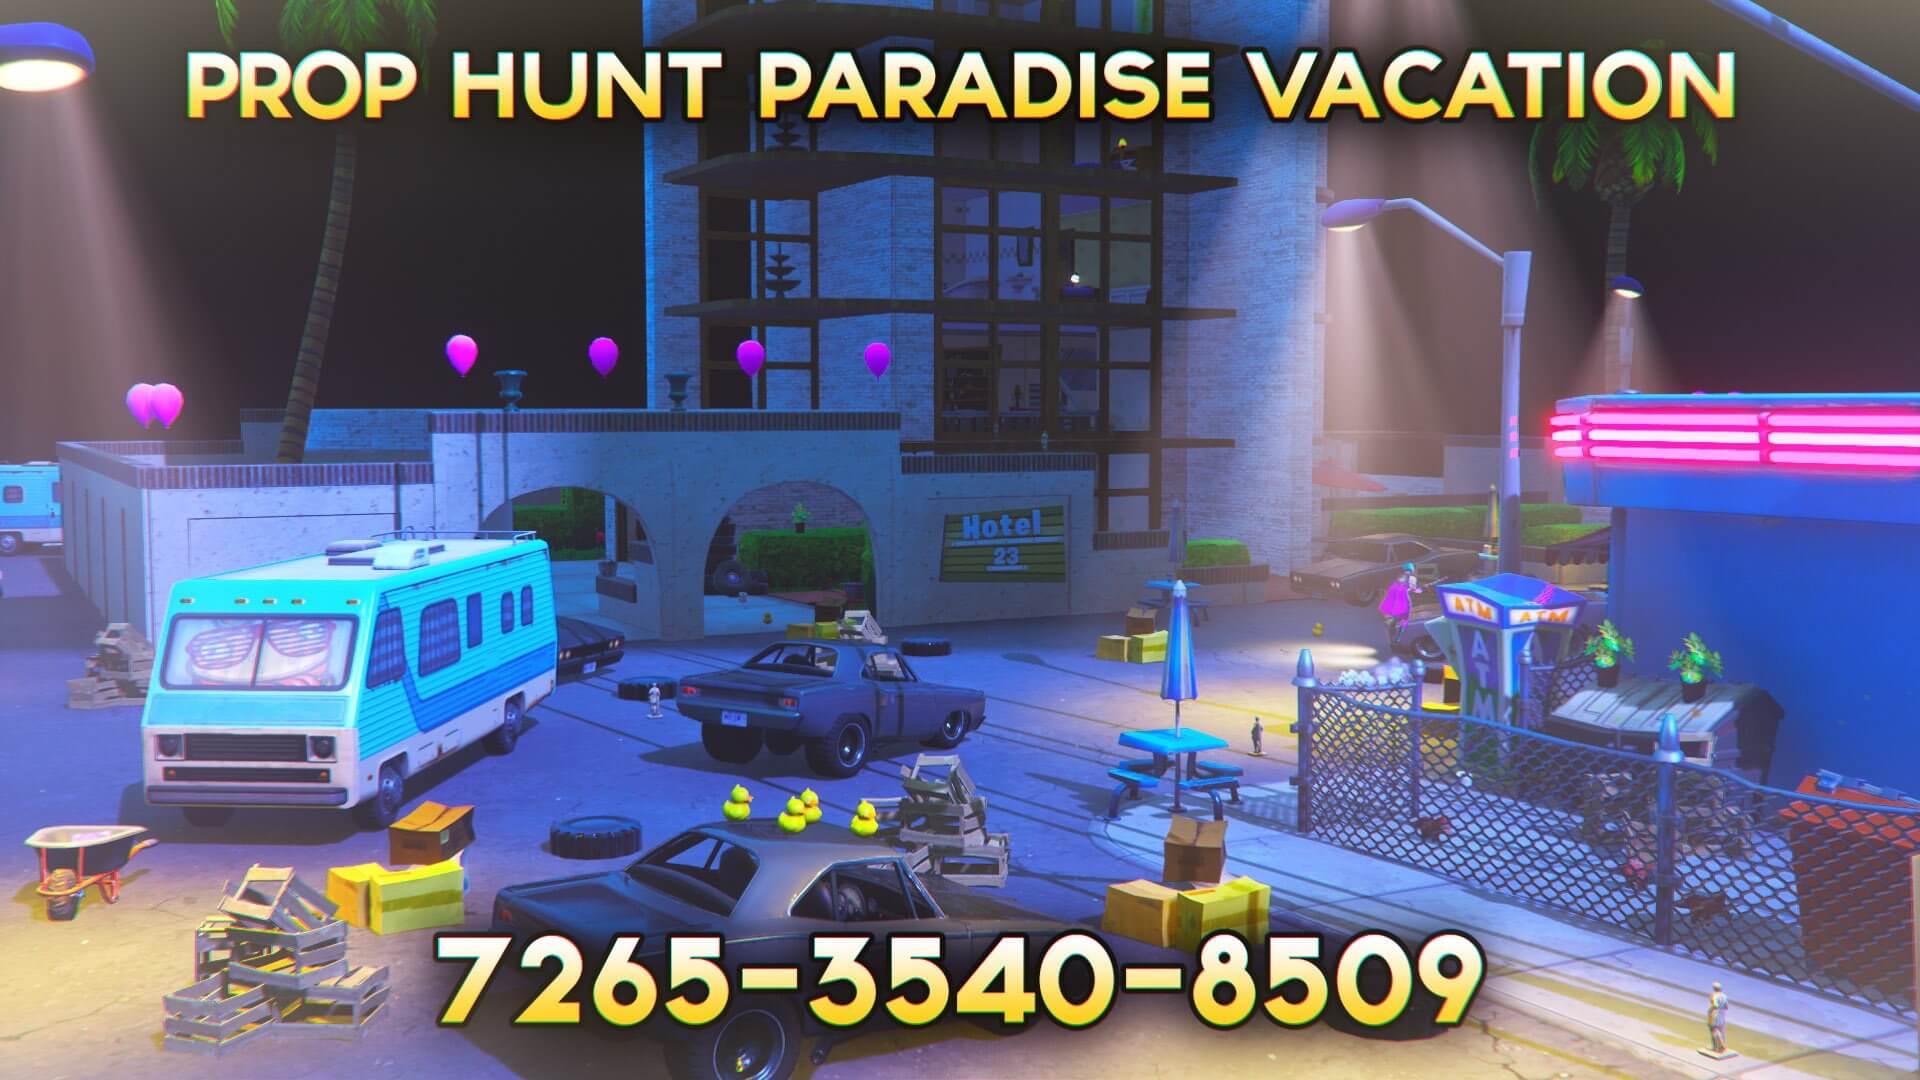 PROP HUNT: PARADISE VACATION BY @ZYREMS